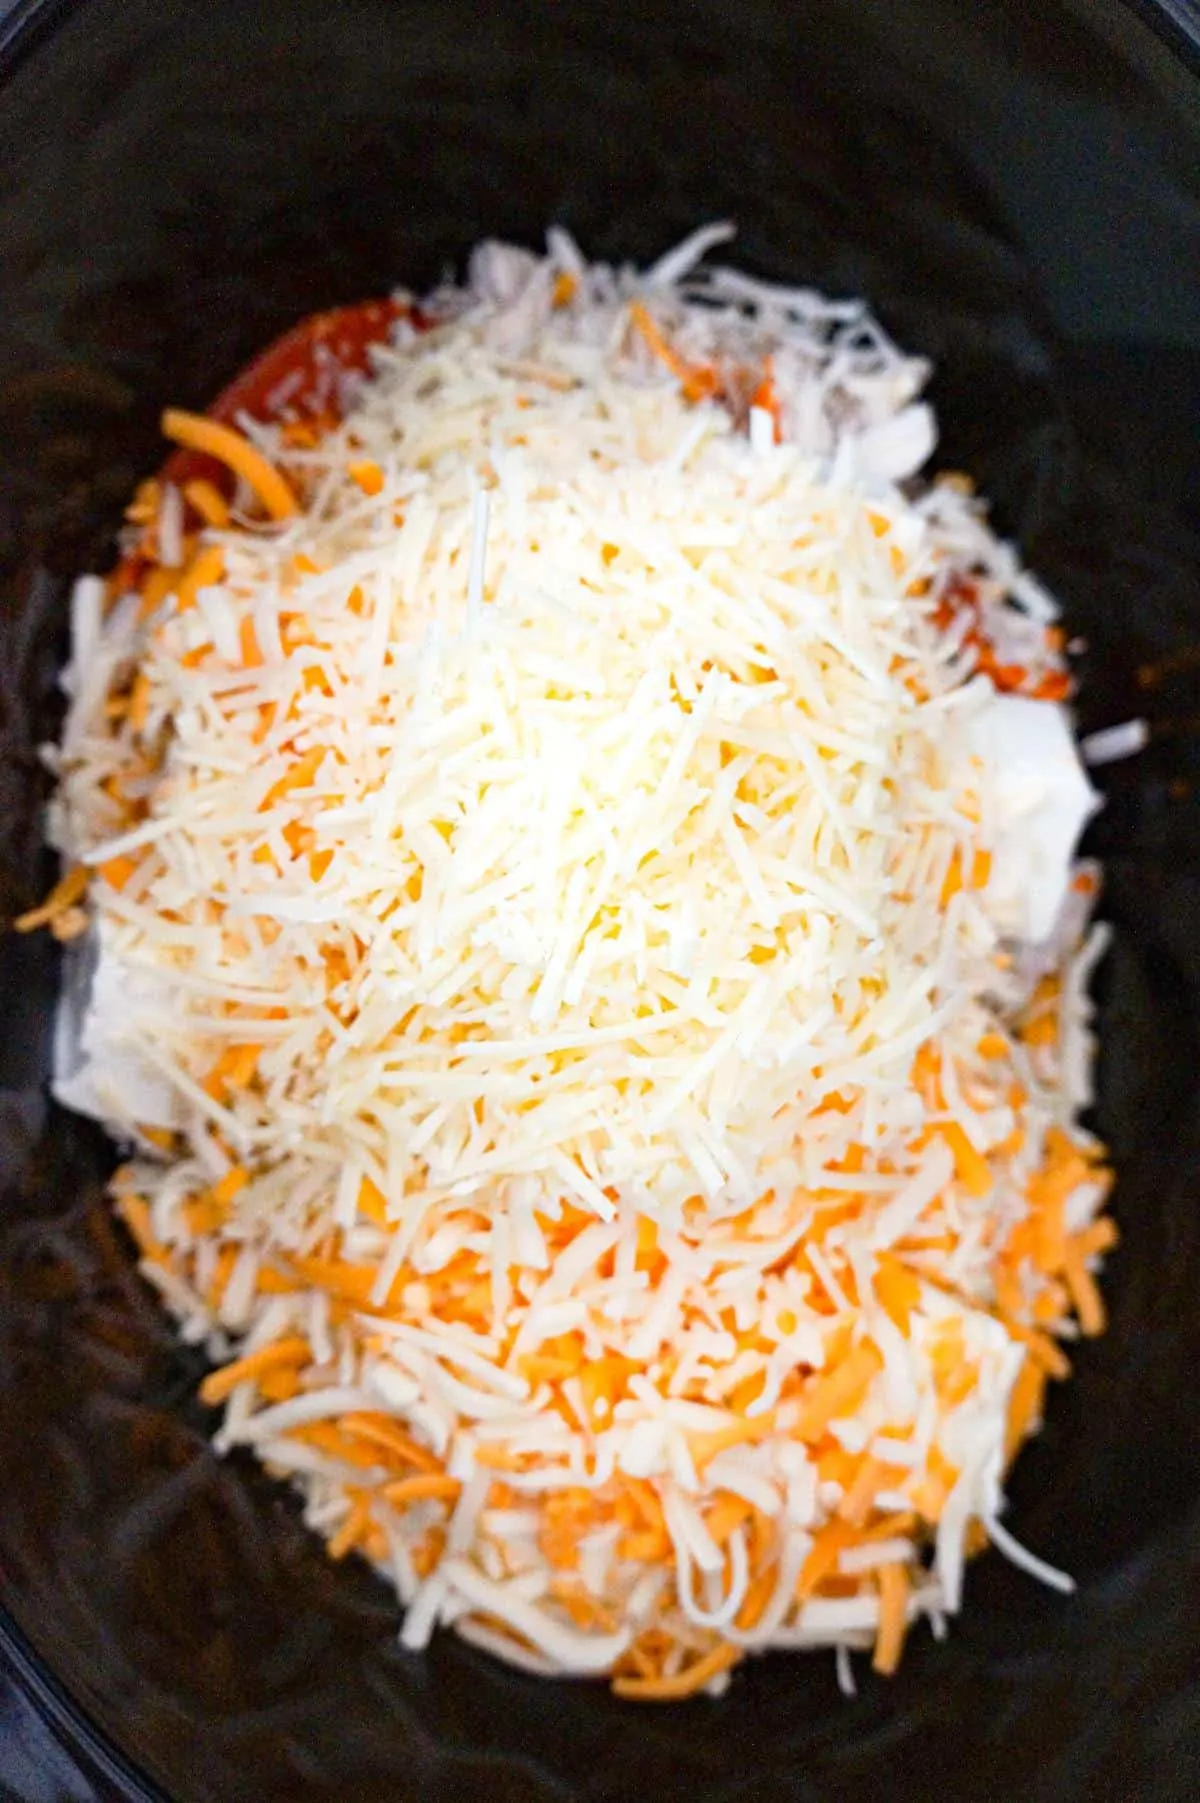 shredded parmesan and shredded Mexican cheeses on top of buffalo chicken dip ingredients in a crock pot